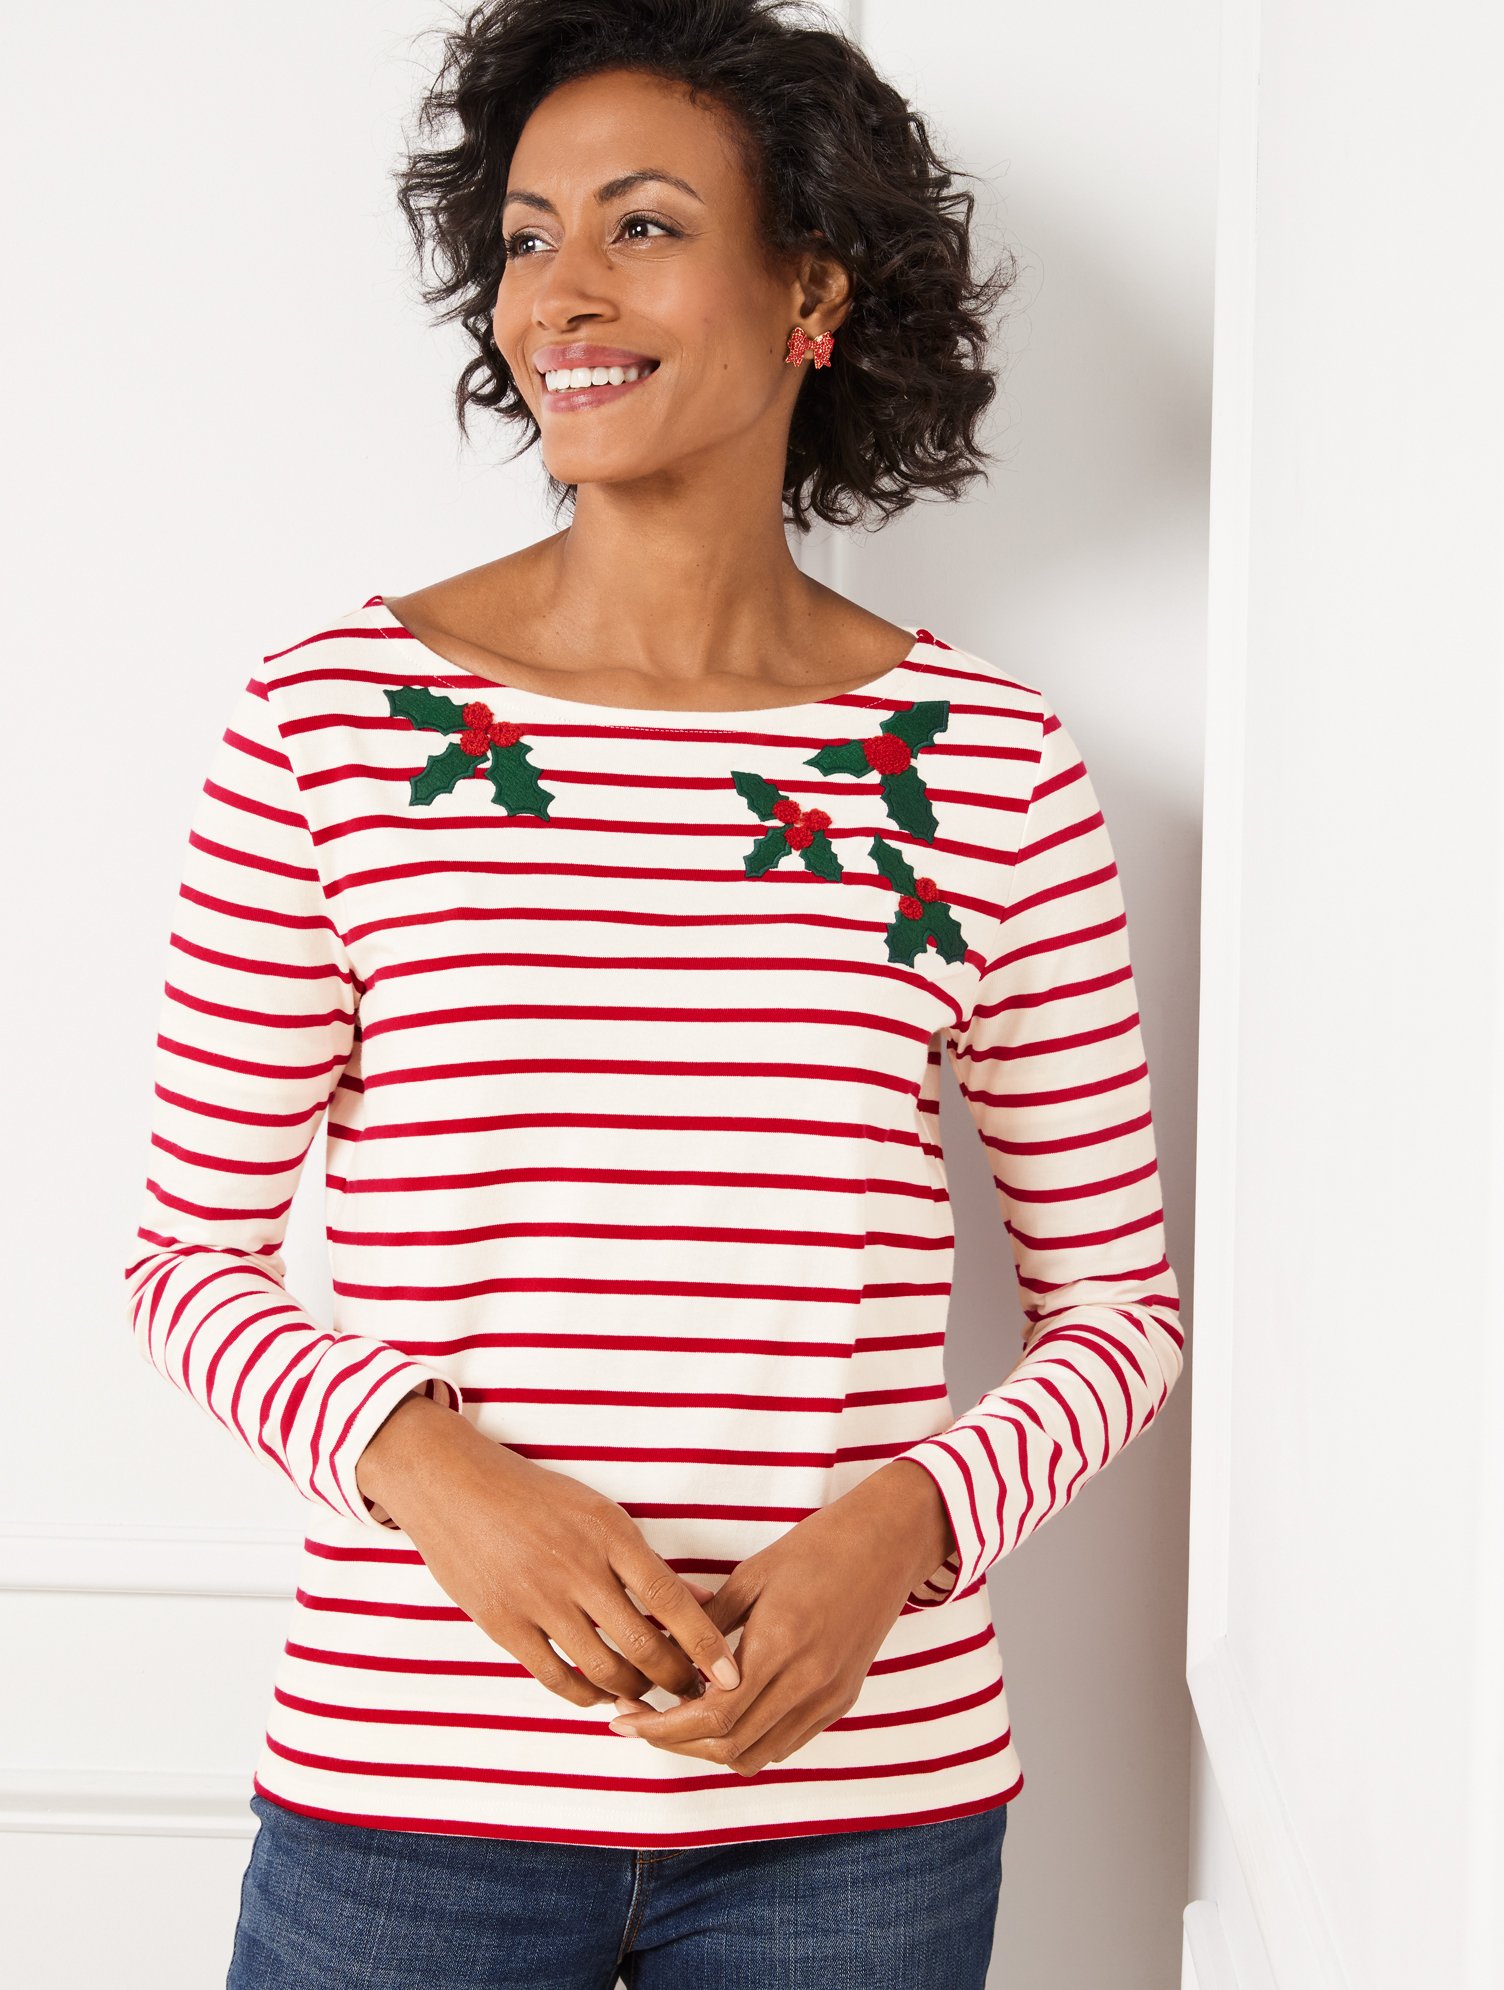 Talbots Petite - Embroidered Bateau Neck T-shirt - Holly Berry - Ivory/red - 2xs - 100% Cotton  In Ivory,red